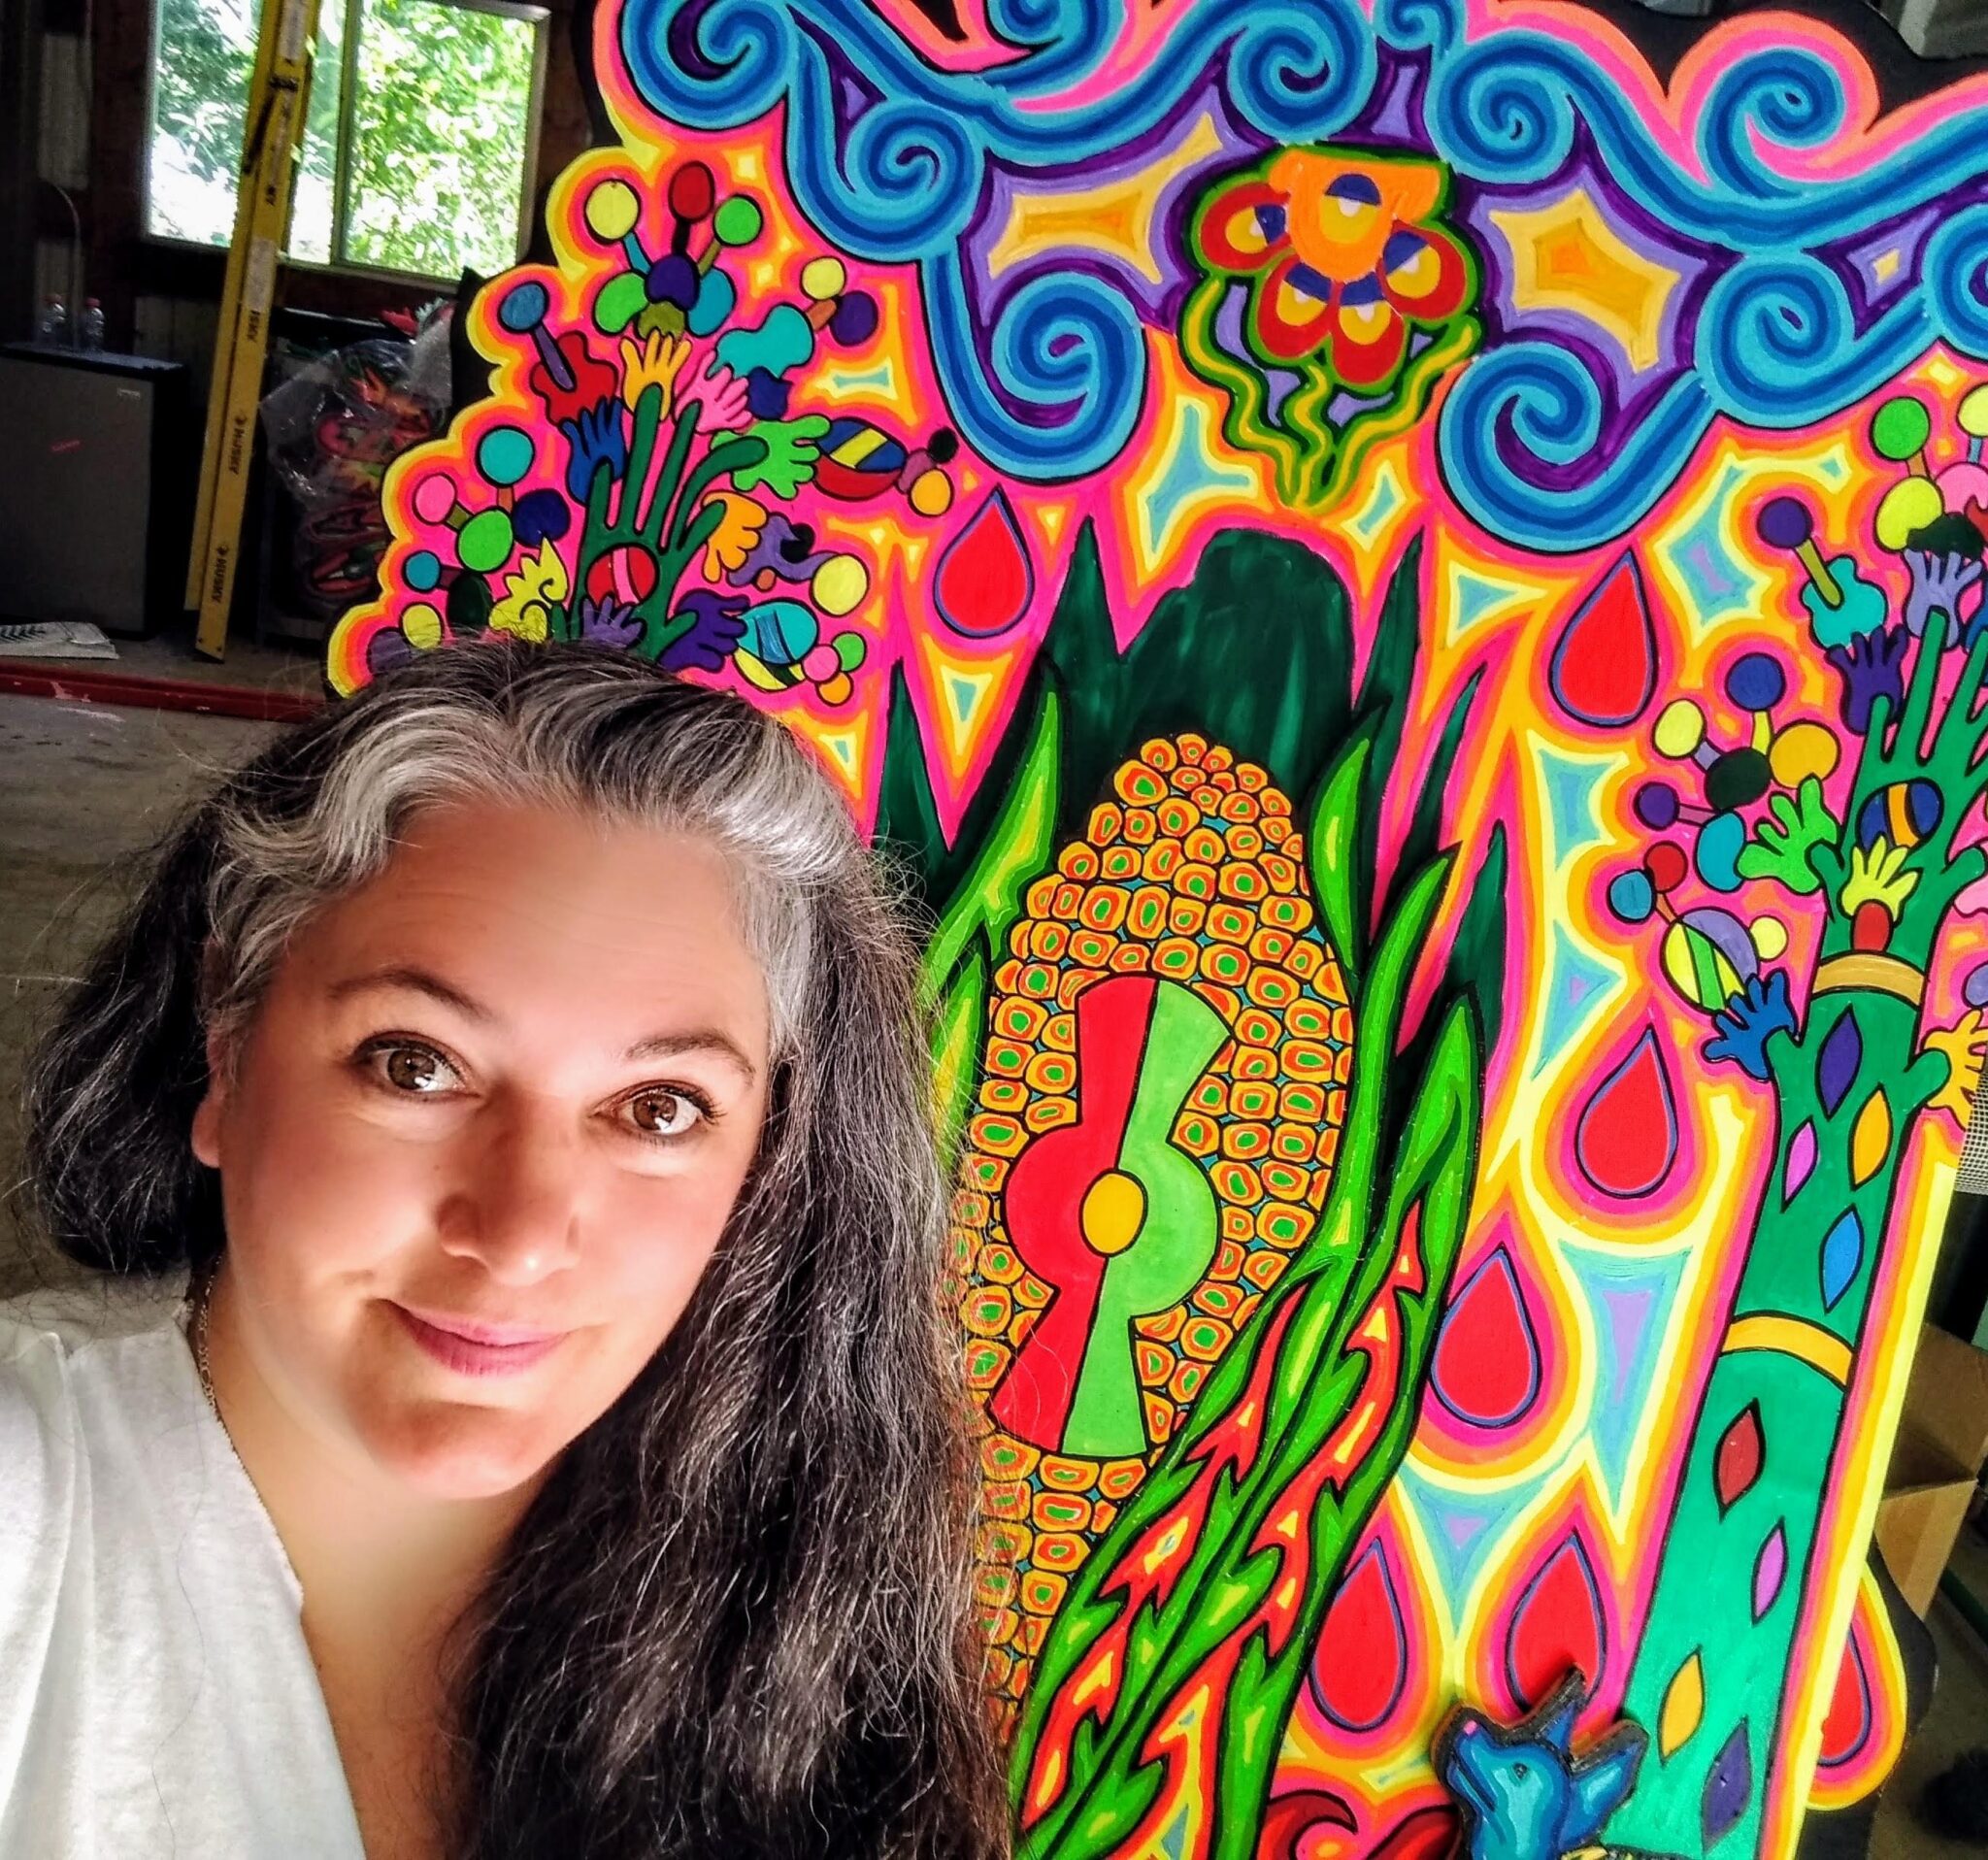 selfie of woman with long hair standing next to colorful painting